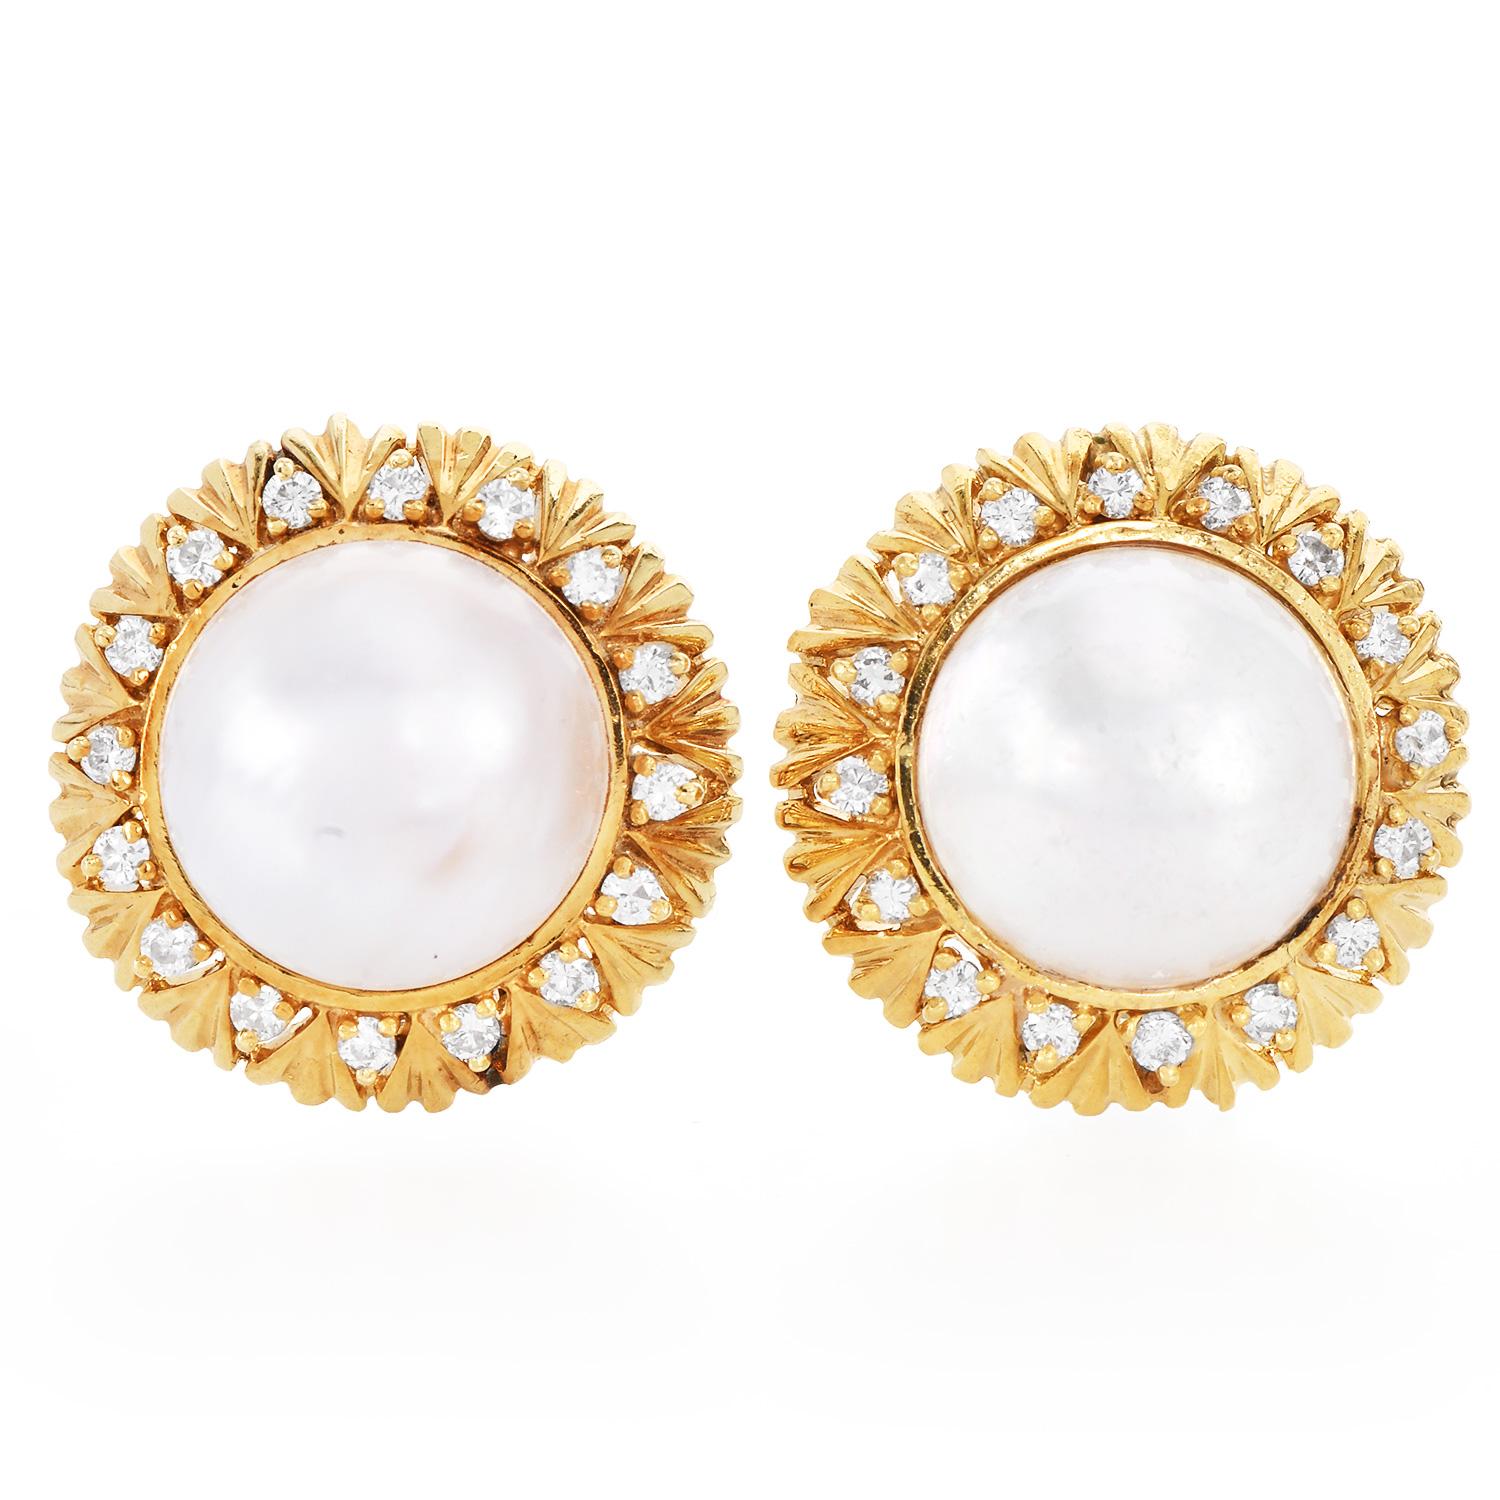 This elegant pair of estate Diamond & Pearl earrings are crafted in solid 18k yellow gold and weighs 19.2 grams. These stylish 1980's  earrings display a stunning sunflower of 32 round-cut high-quality diamonds weighing 0.50 carats, G-H color, VS